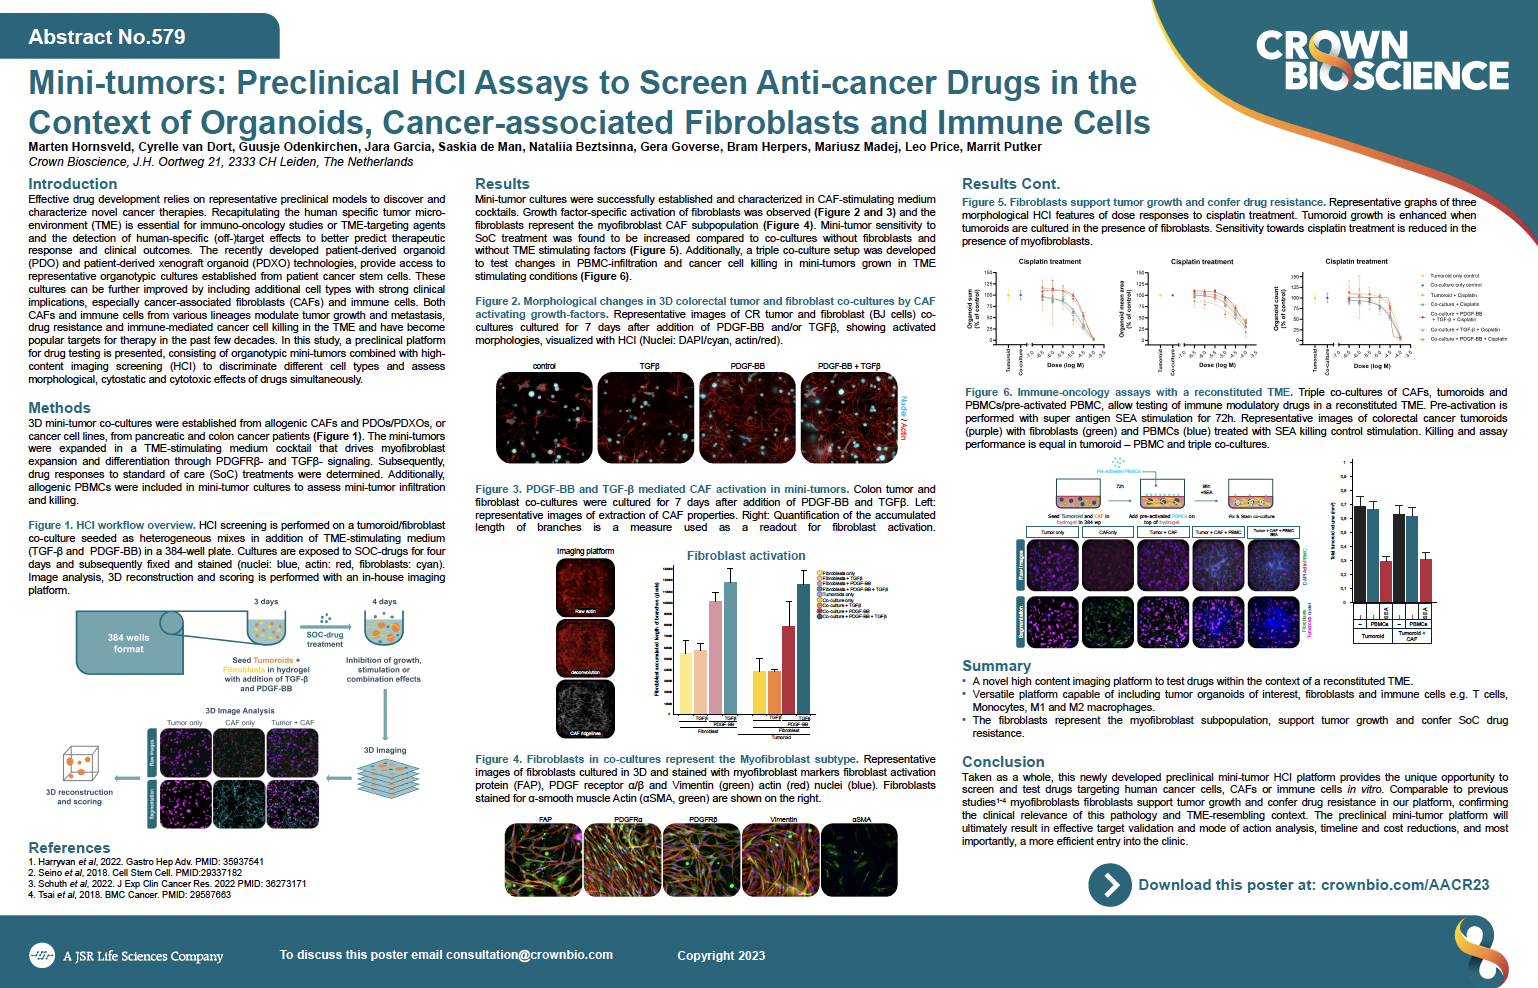 AACR 2023 Posters 579: Mini-tumors: Preclinical HCI Assays to Screen Anti-cancer Drugs in the Context of Organoids, Cancer-associated Fibroblasts and Immune Cells